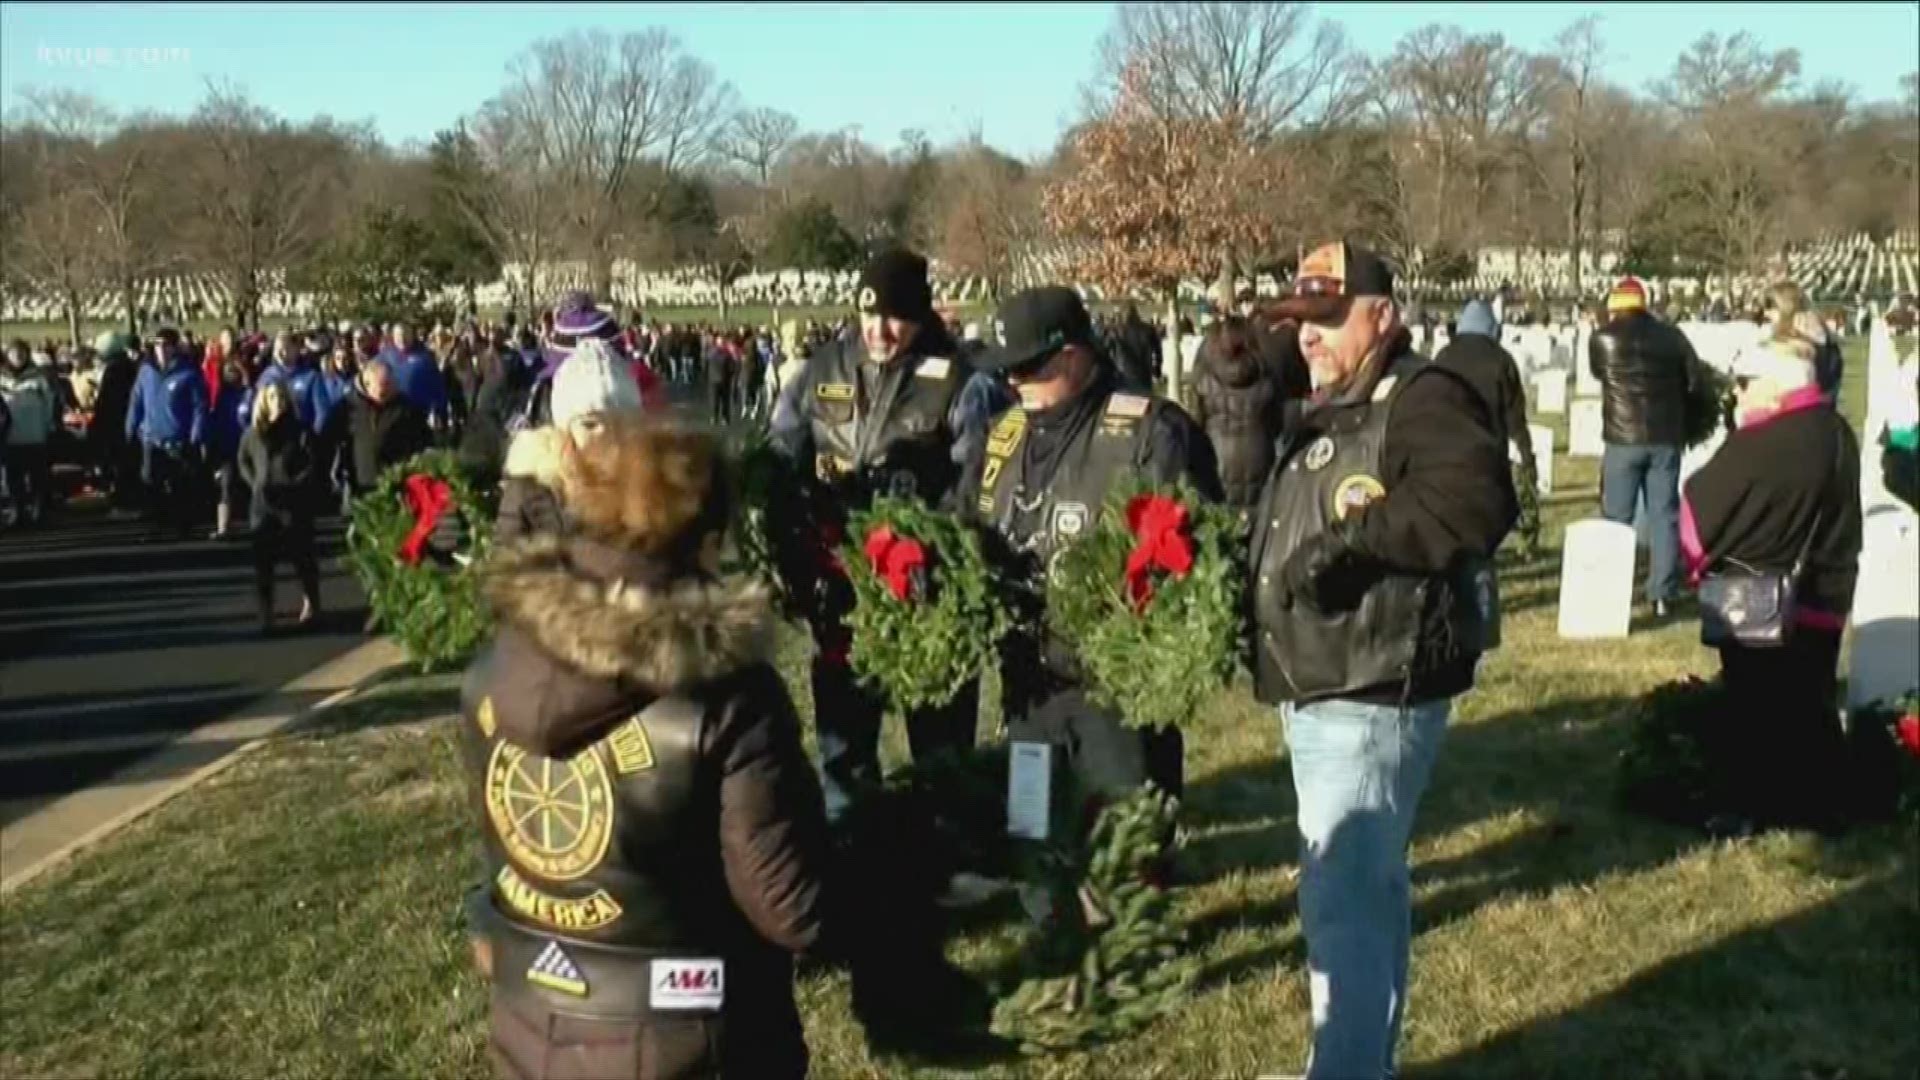 Volunteers with Wreaths Across America will place holiday wreaths on more than 3,000 graves at the Texas State Cemetery.